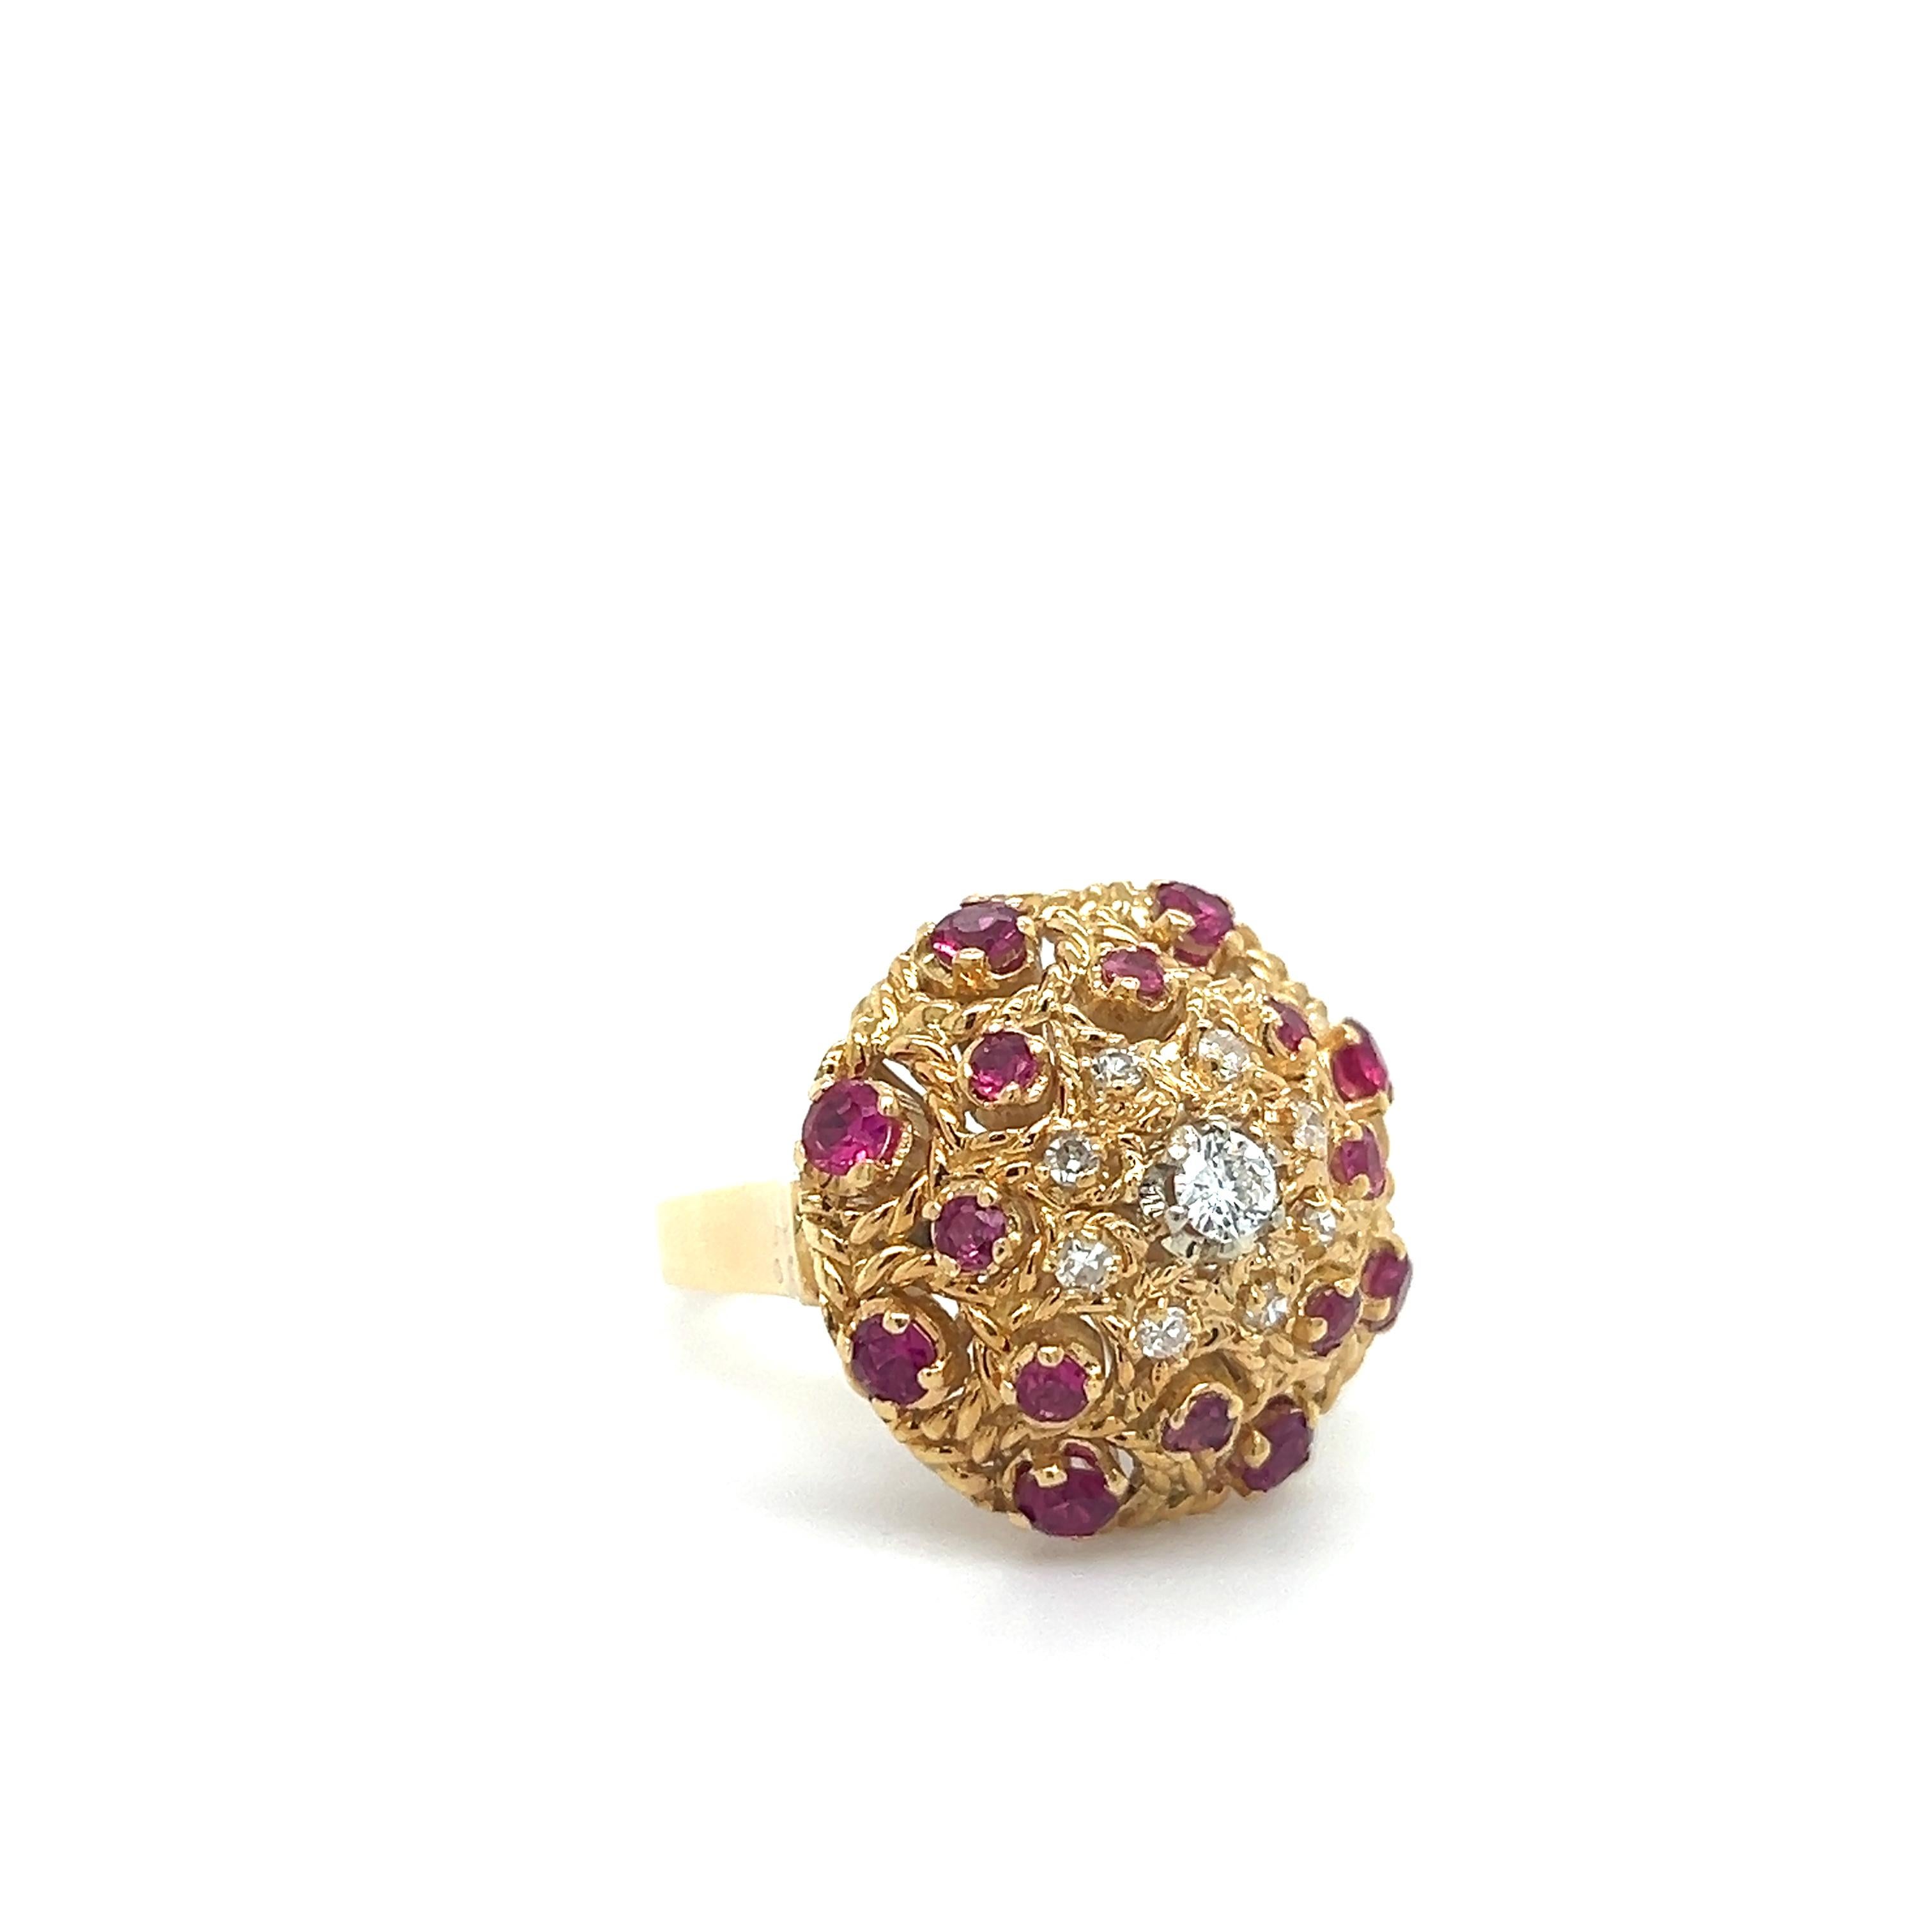 Beautiful estate collection bombe ring crafted in 18k yellow gold. Details are seen throughout as round cut rubies and diamond gemstones highlight the design. The ring showcases graduating sizes of rubies and diamonds.
There are 16 rubies in the